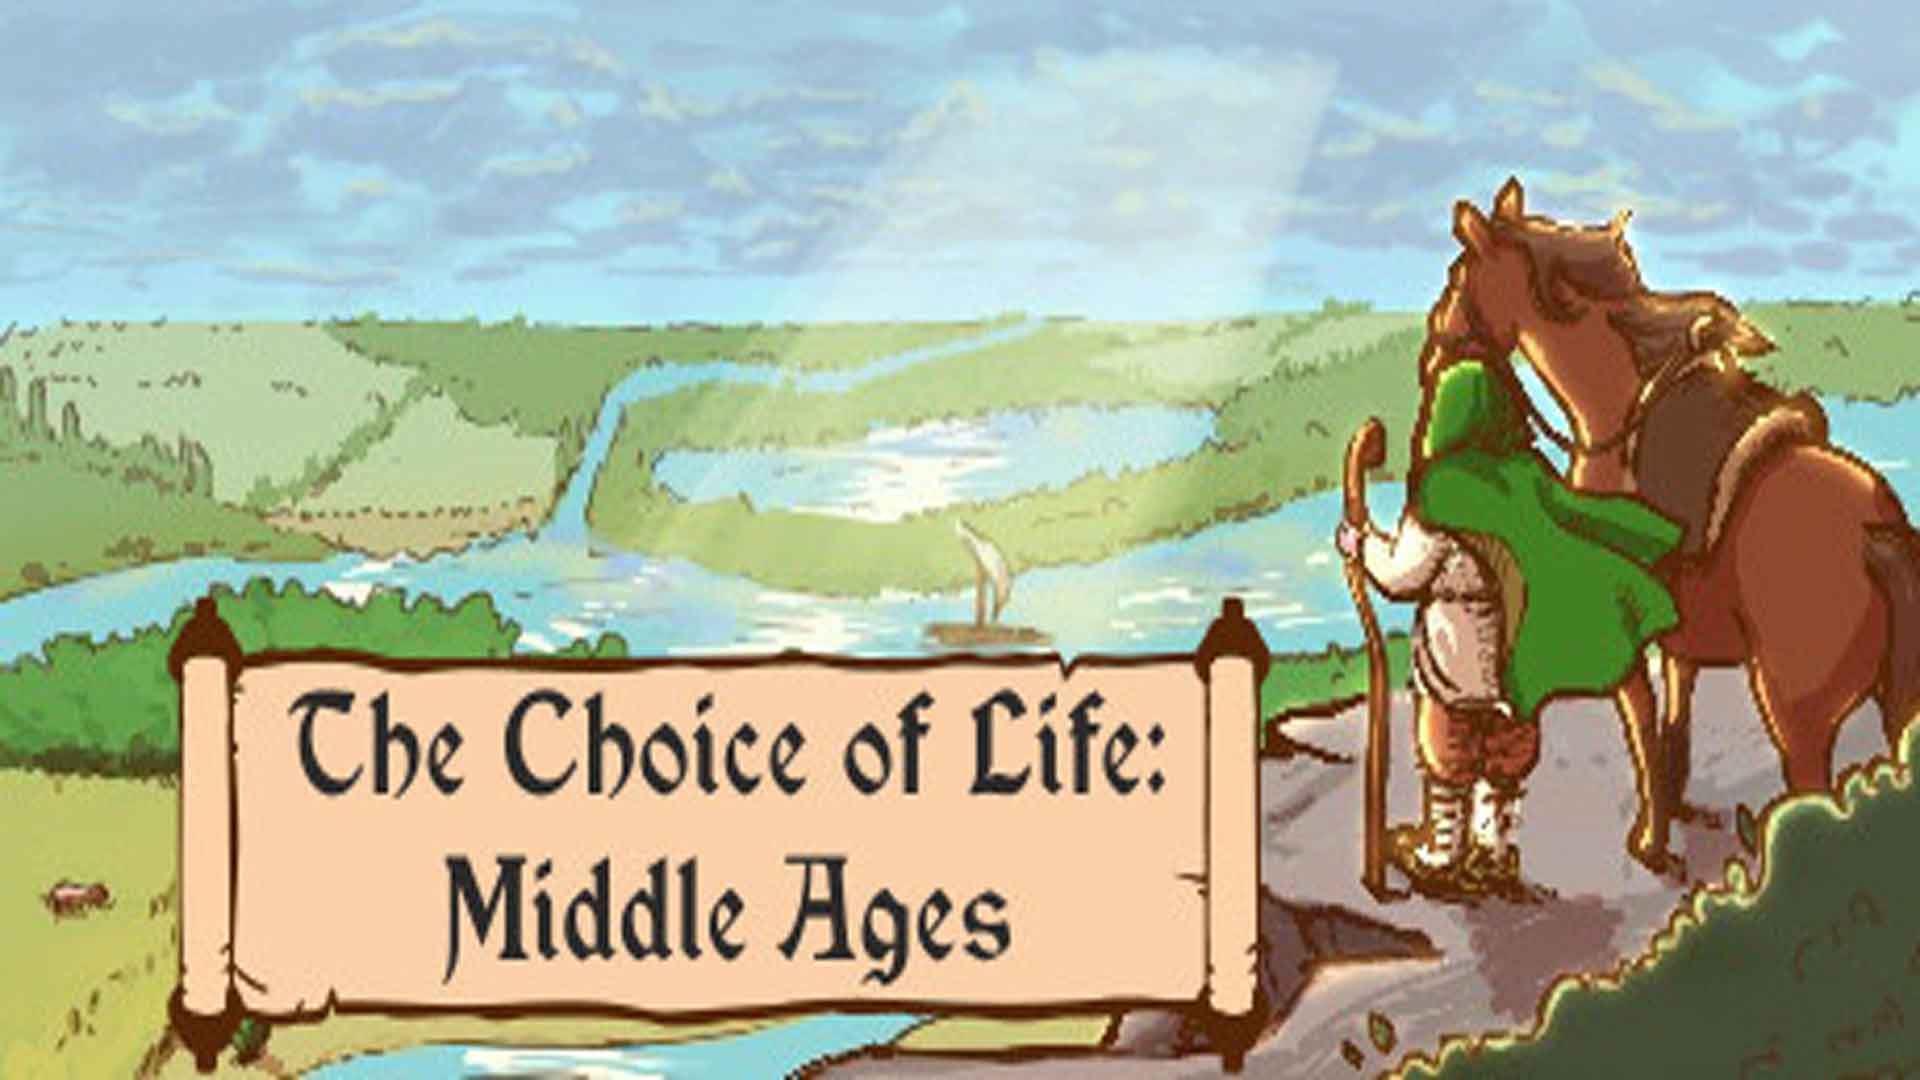 Choice of life игра. Игра the choice of Life. The choice of Life: Middle ages. The choice of Life Middle ages игра. The choice of Life Middle ages карта.